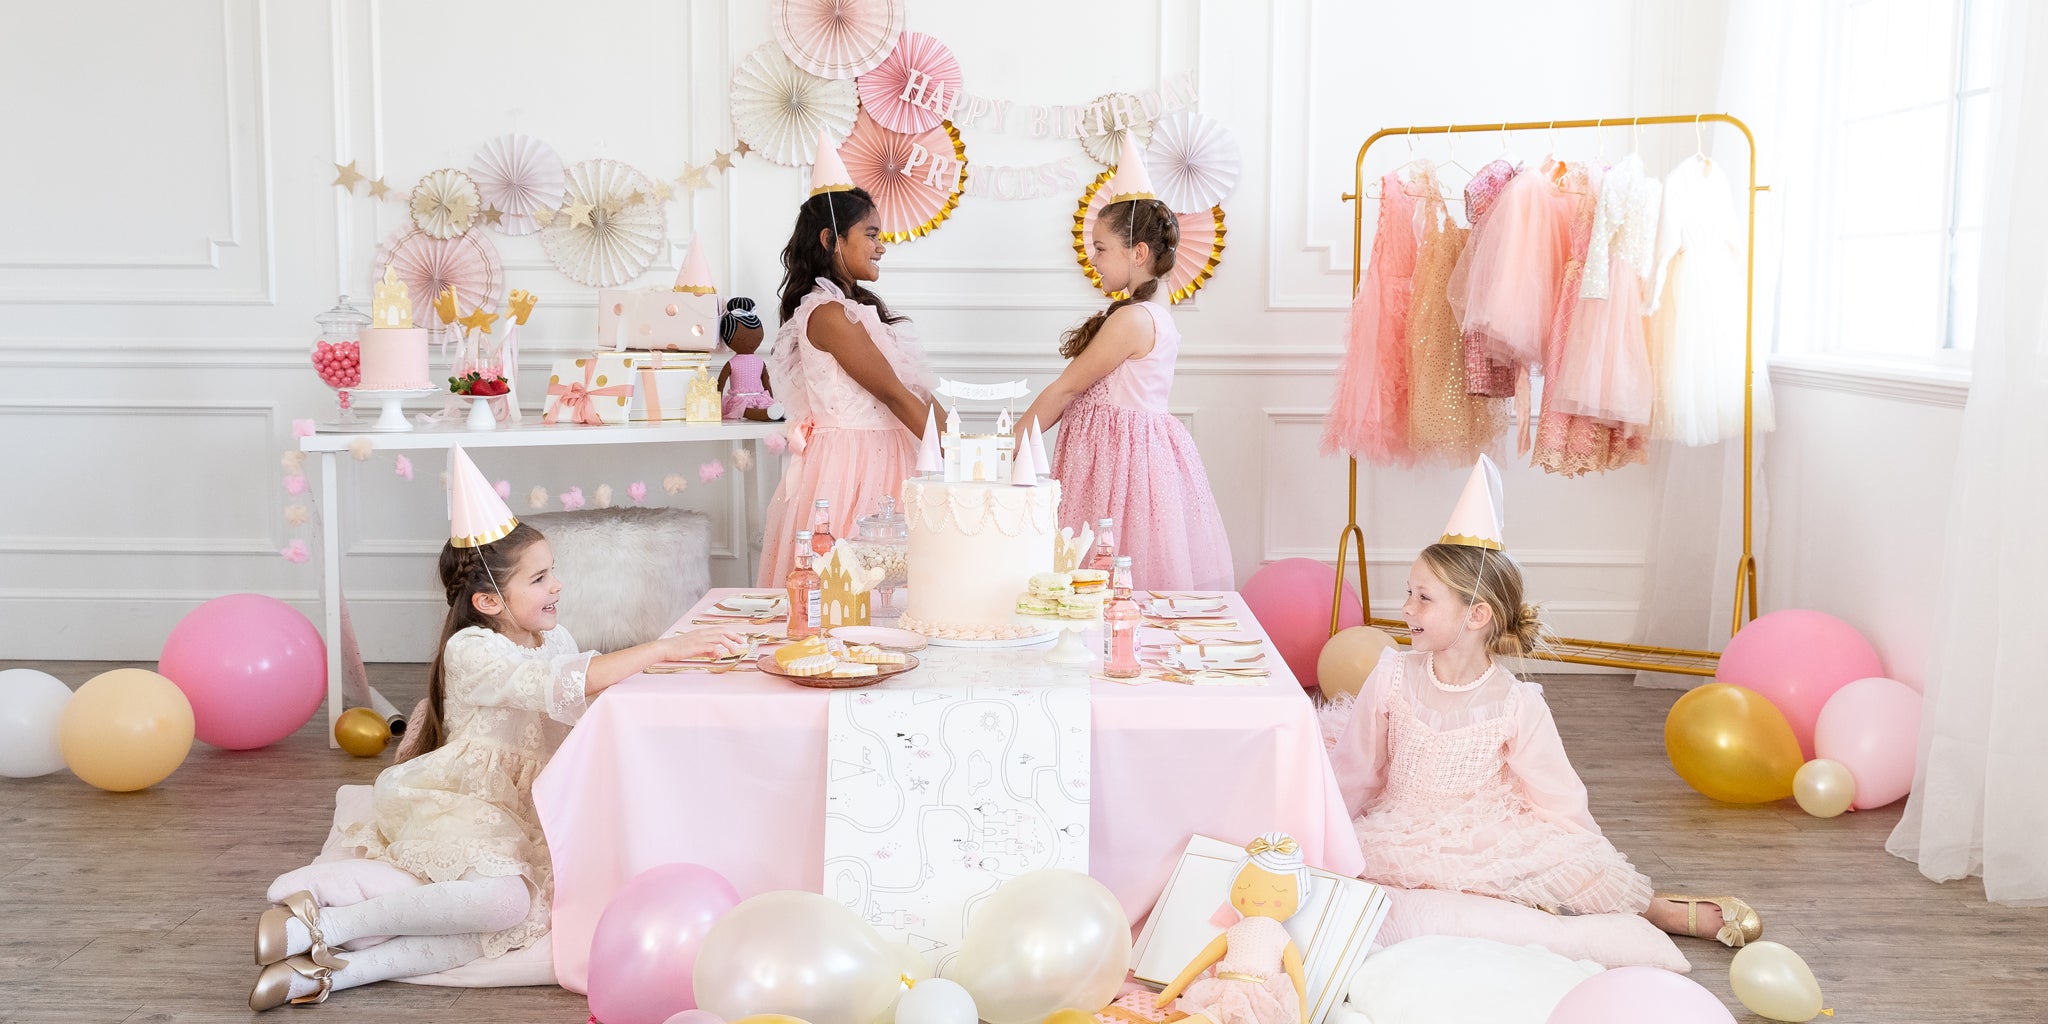 Princess Party Image. Collection of princess theme paper plates, paper cups, napkins, hanging decor and balloons to truly make your little one feel like a princess on her special day. 